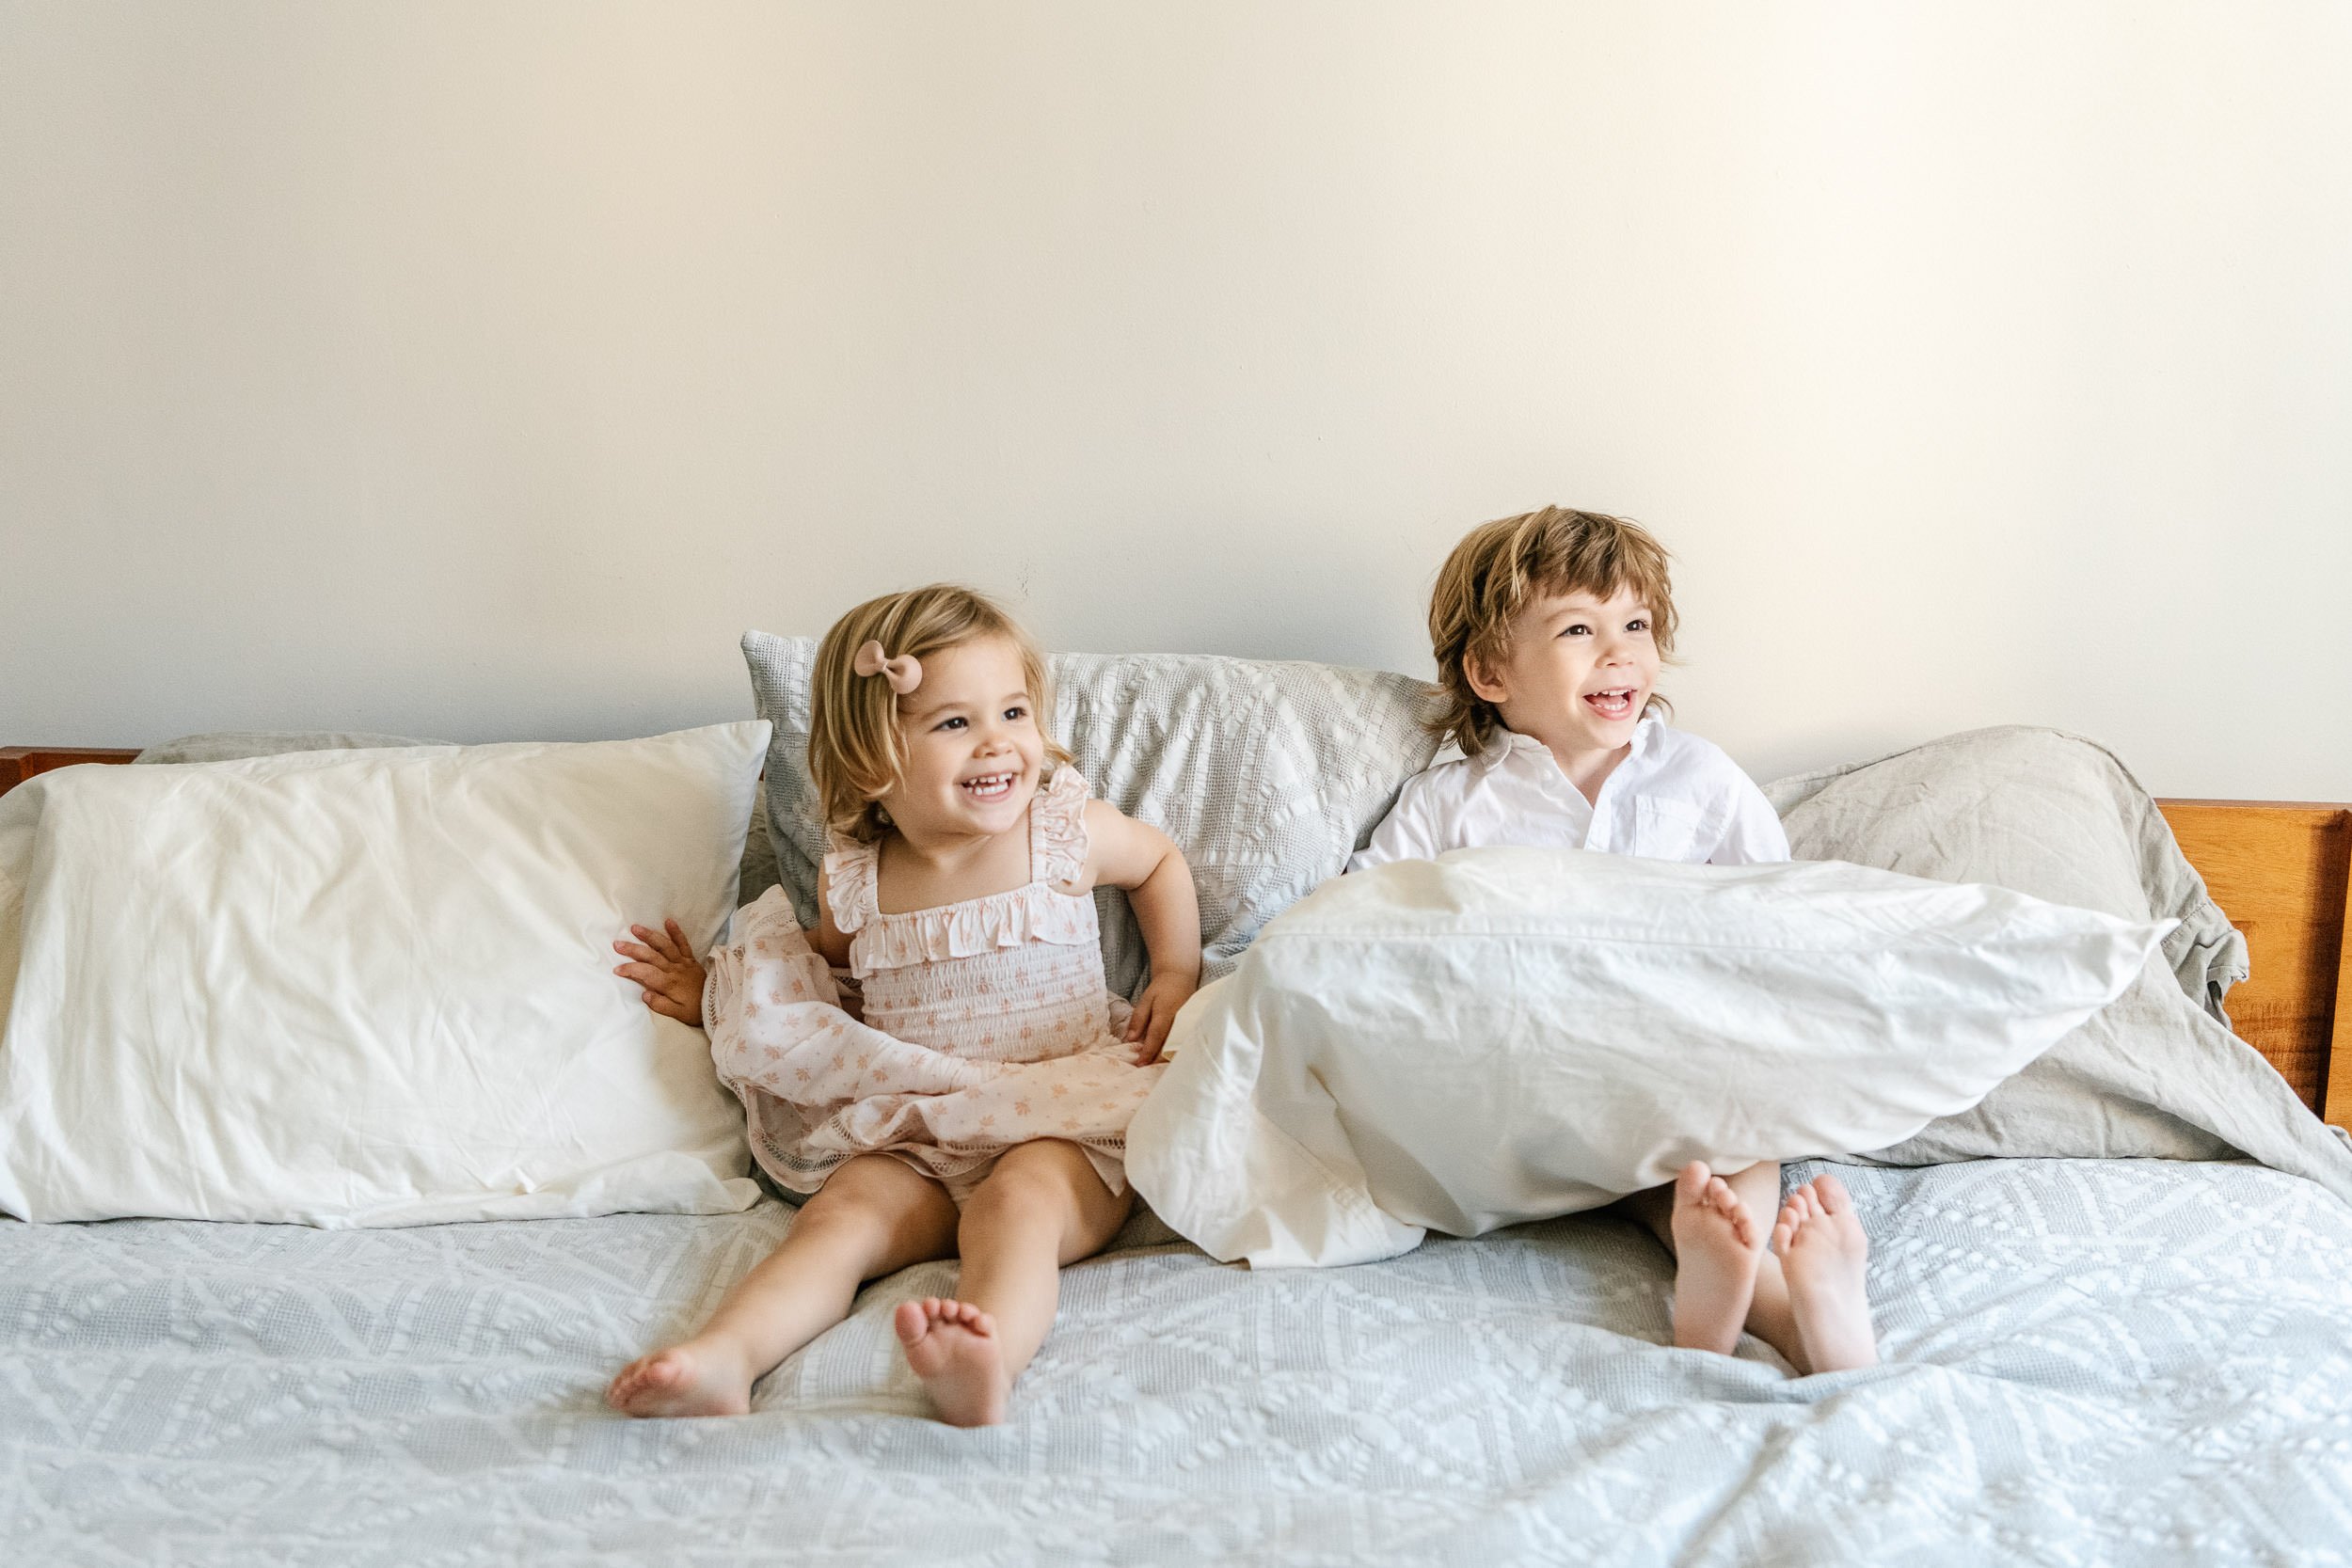  A brother and sister sit on a bed and laugh captured by Nicole Hawkins Photography. in home portraits children #NicoleHawkinsPhotograaphy #NicoleHawkinsChildren #NewYorkPortraits #KidsinNewYork #ChildrensPortraits #lifestyleportraits 